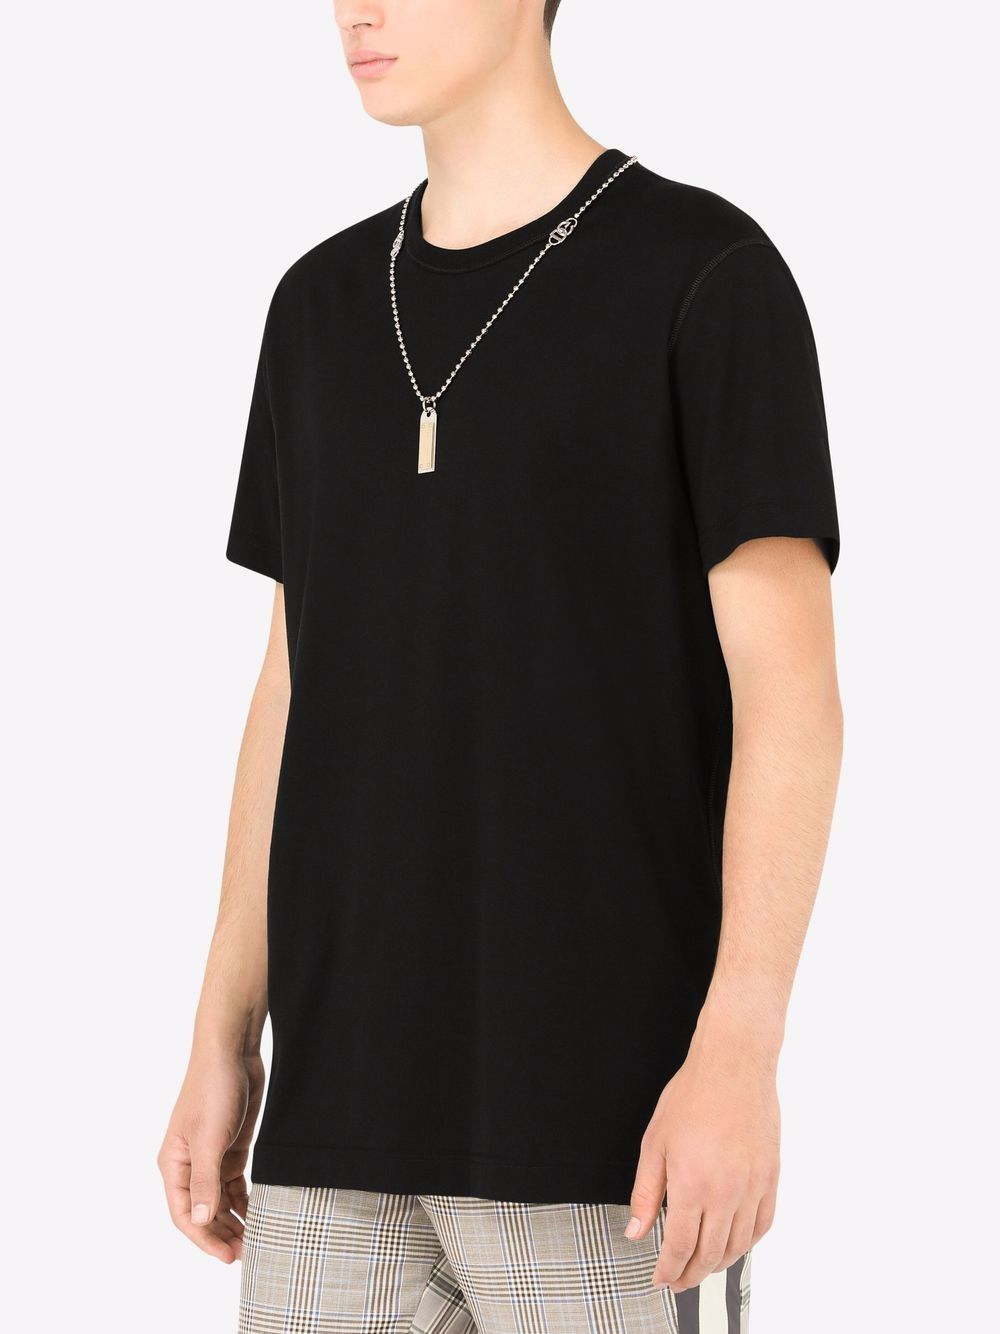 Shop Dolce & Gabbana logo dog-tag T-shirt with Express Delivery - FARFETCH